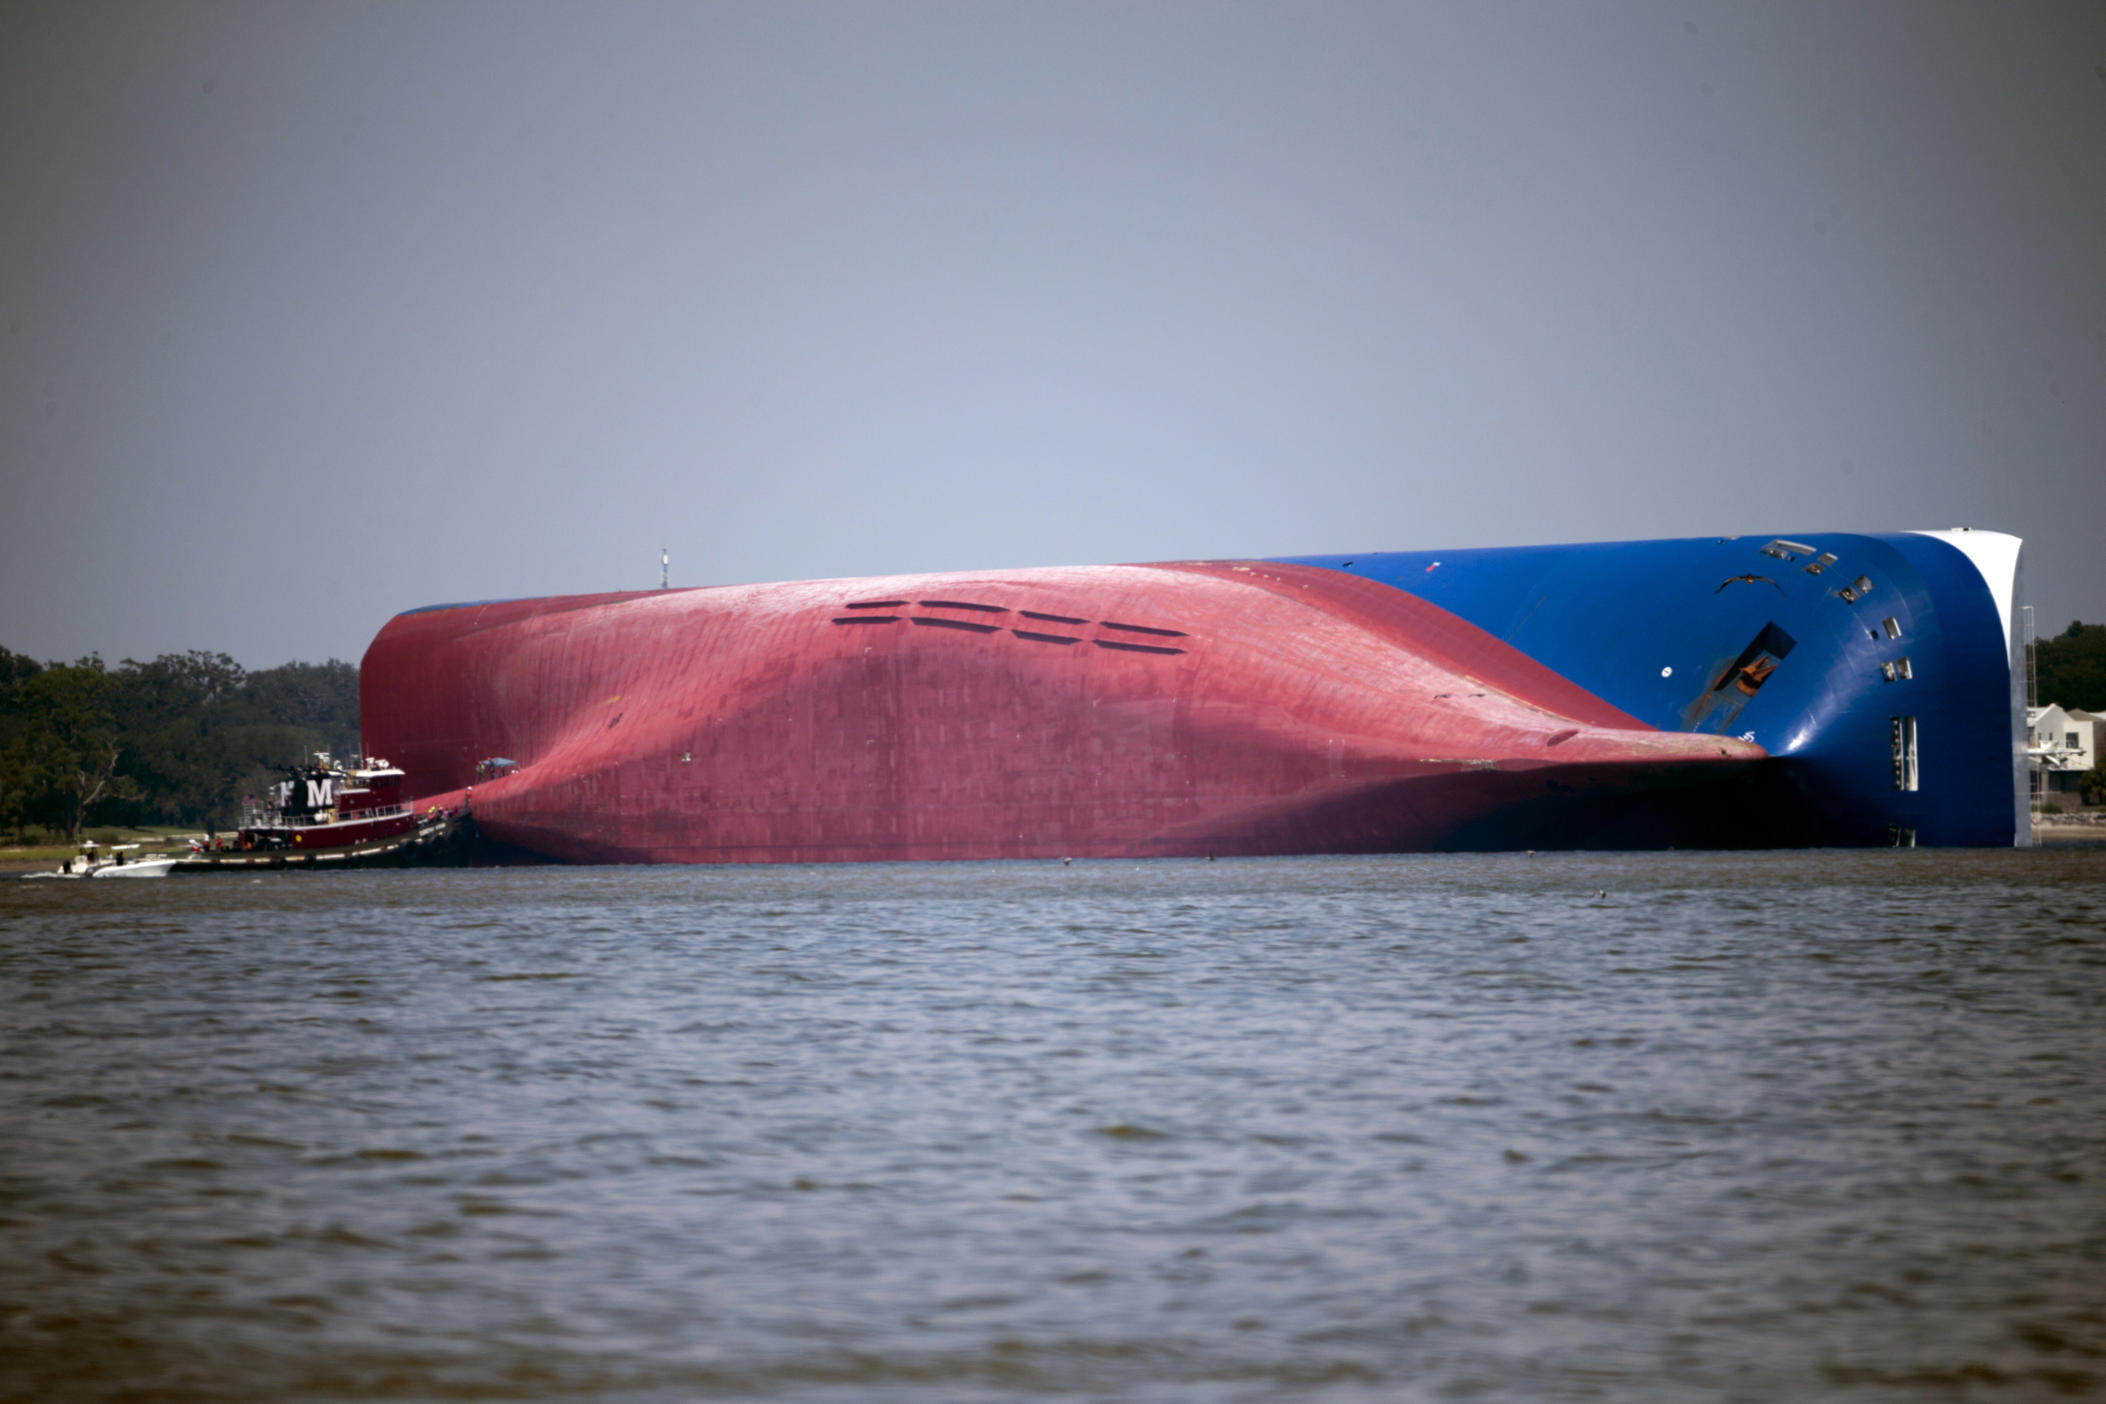 FILE - In this Sept. 9, 2019, file photo, a Moran tugboat nears the stern of the capsizing vessel Golden Ray as a tent and rescuers can be seen near the bottom of the ship near the tug boat in Jekyll Island, Ga. Marine salvage experts are trying to determine what caused a fire, Sunday, Oct. 20, in the overturned cargo ship lying close to Georgia's seacoast. (AP Photo/Stephen B. Morton, File)